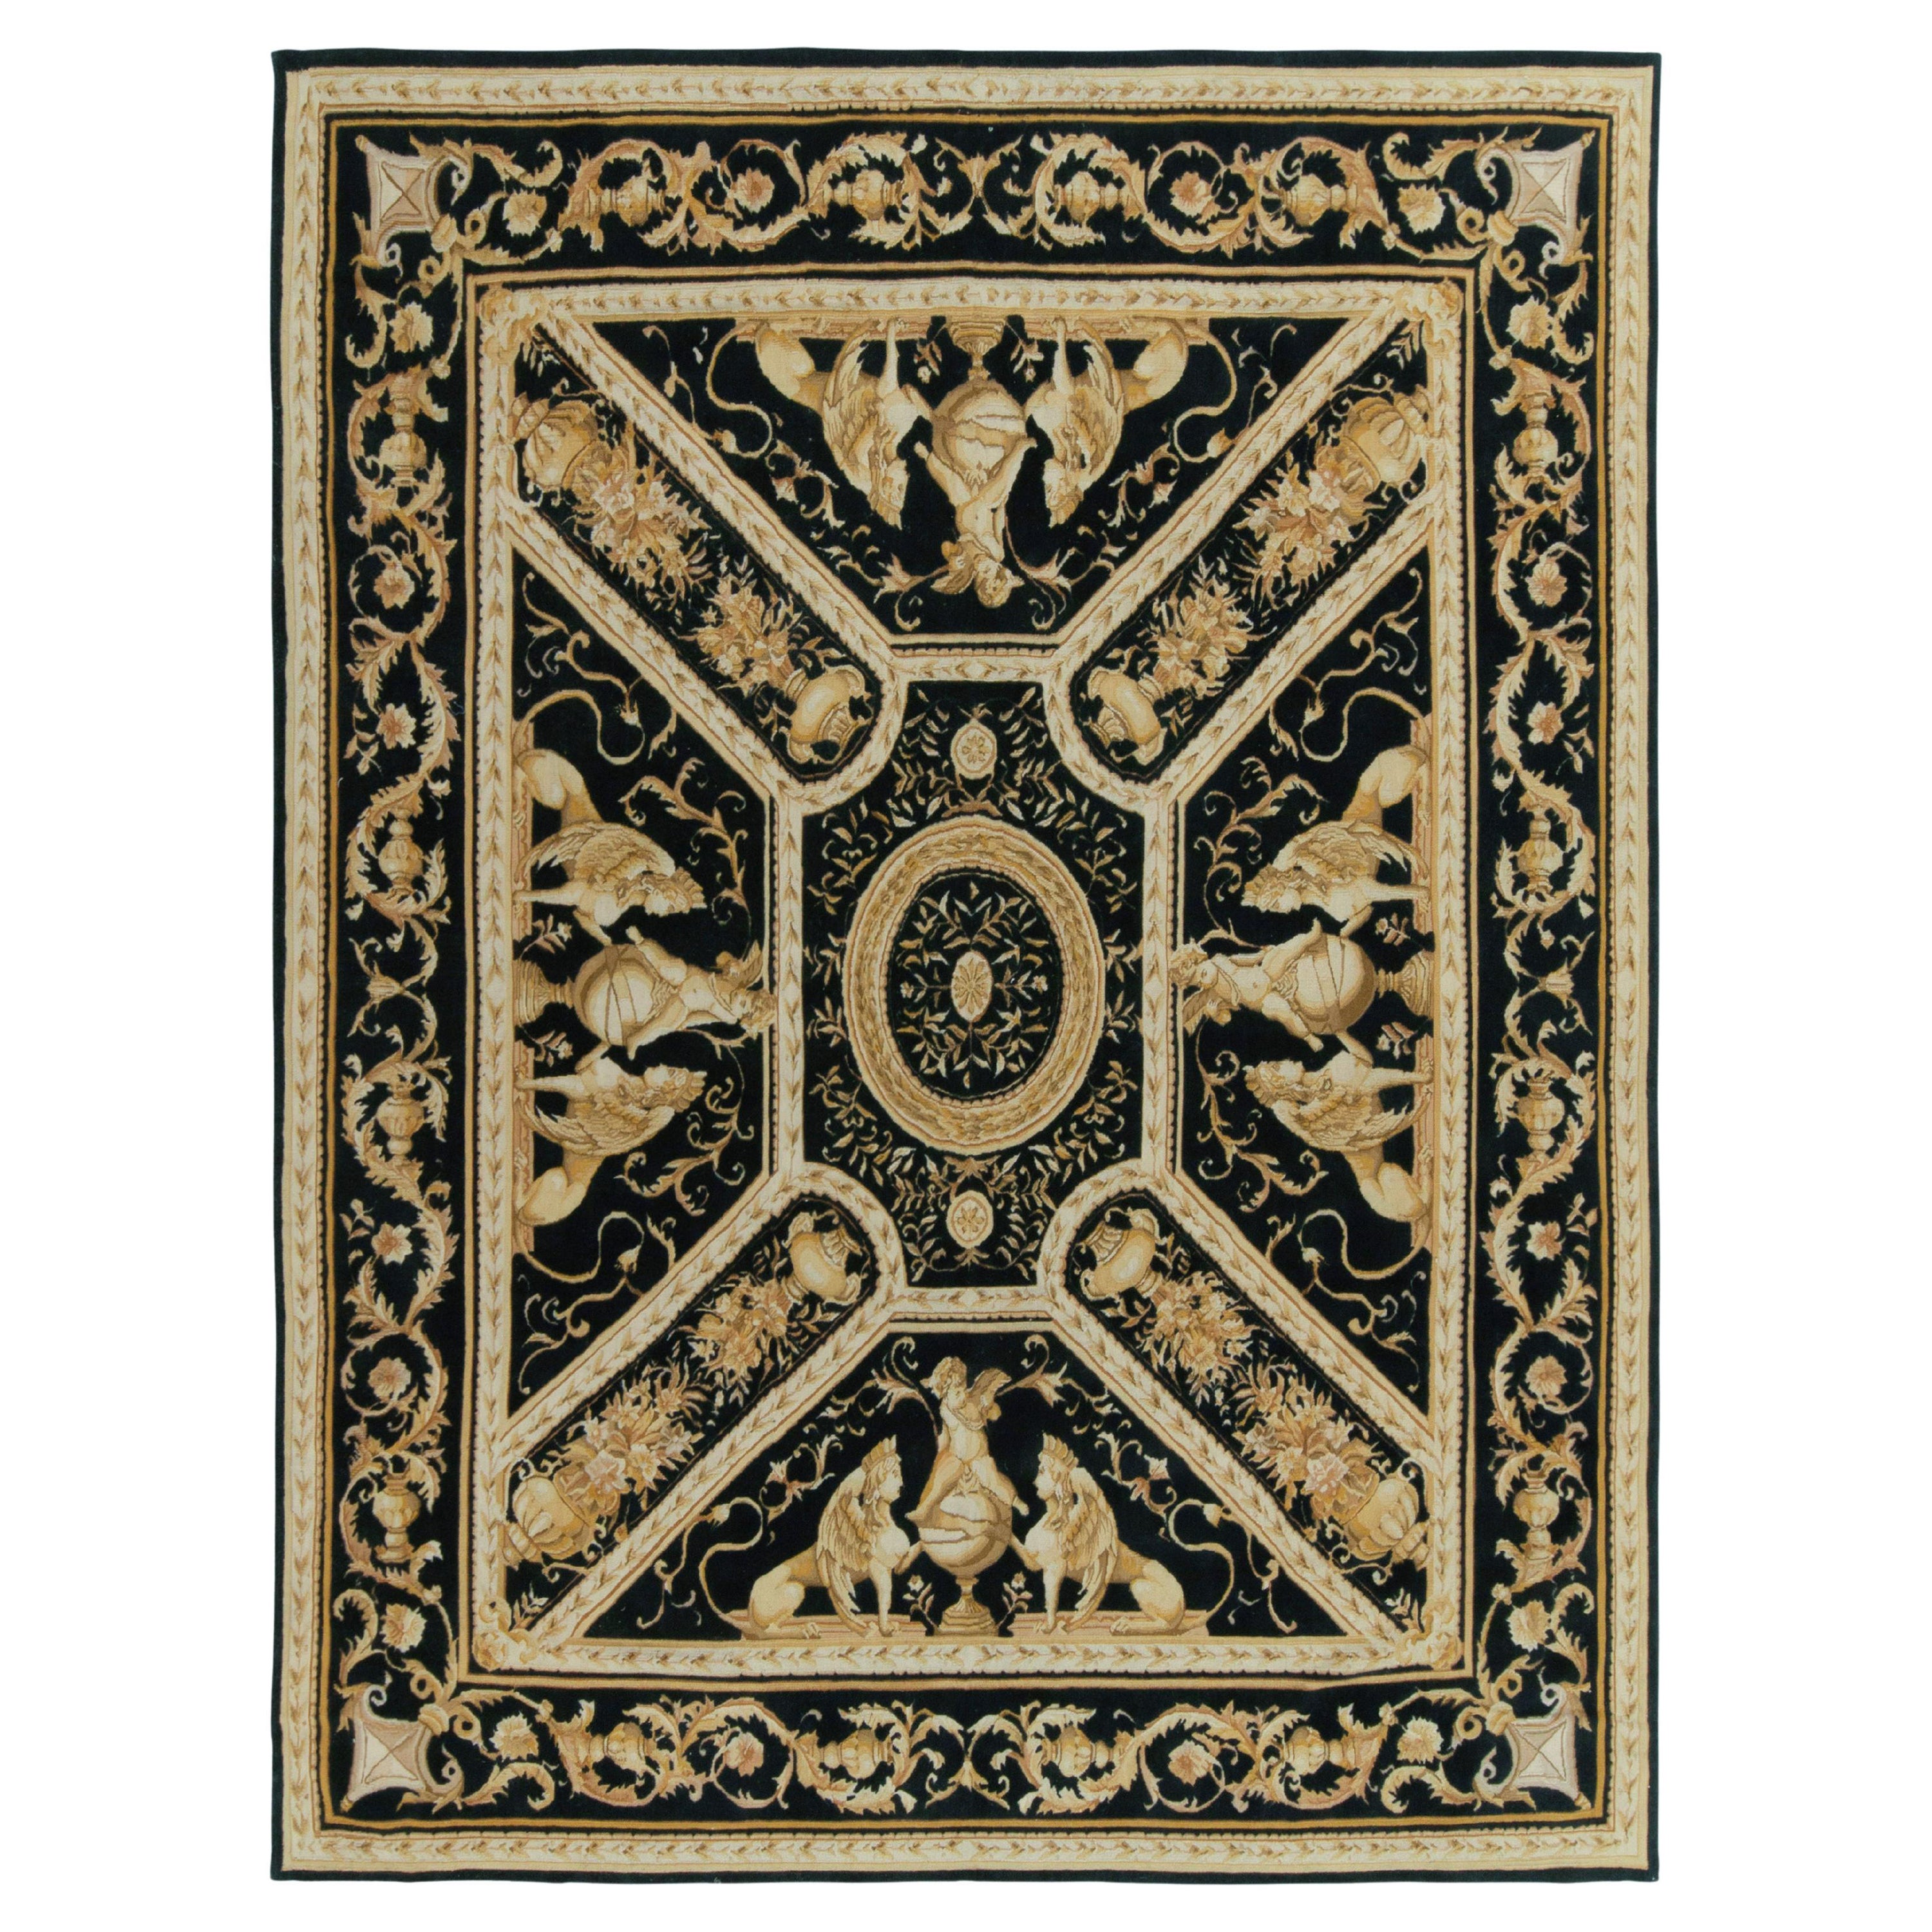 Tudor Chinese and East Asian Rugs